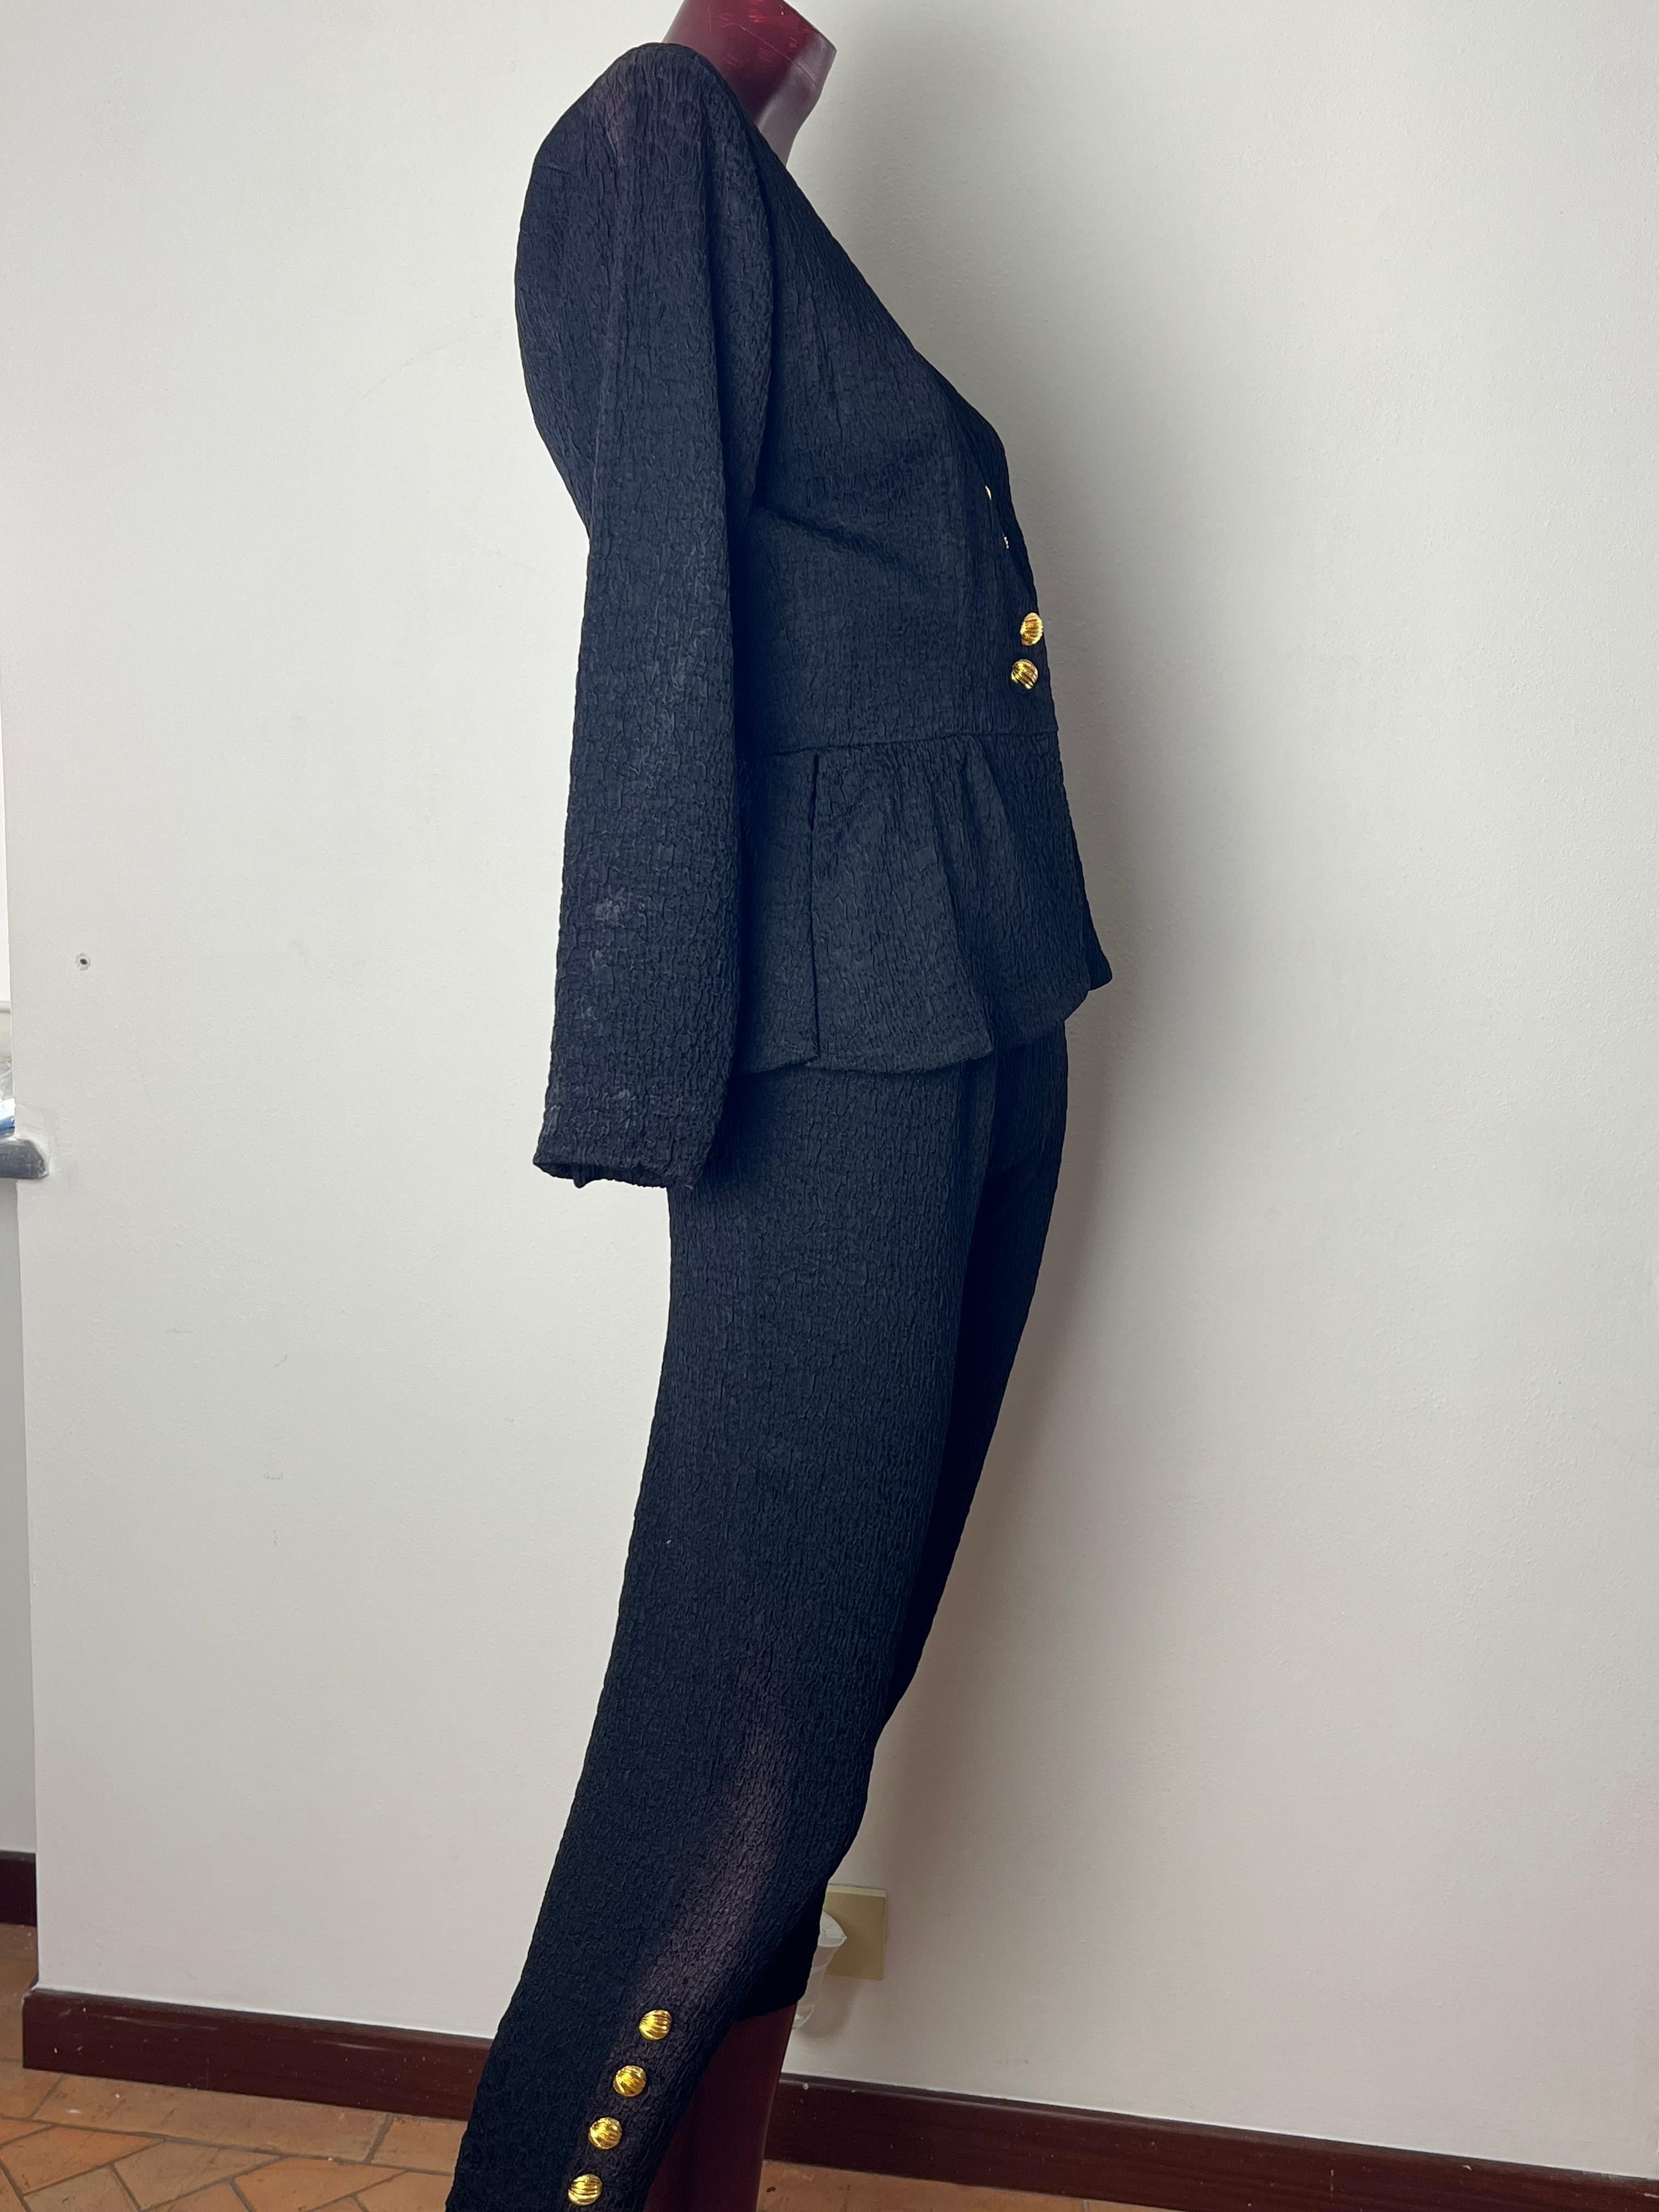 black pants ysl suit with gold buttons For Sale 1